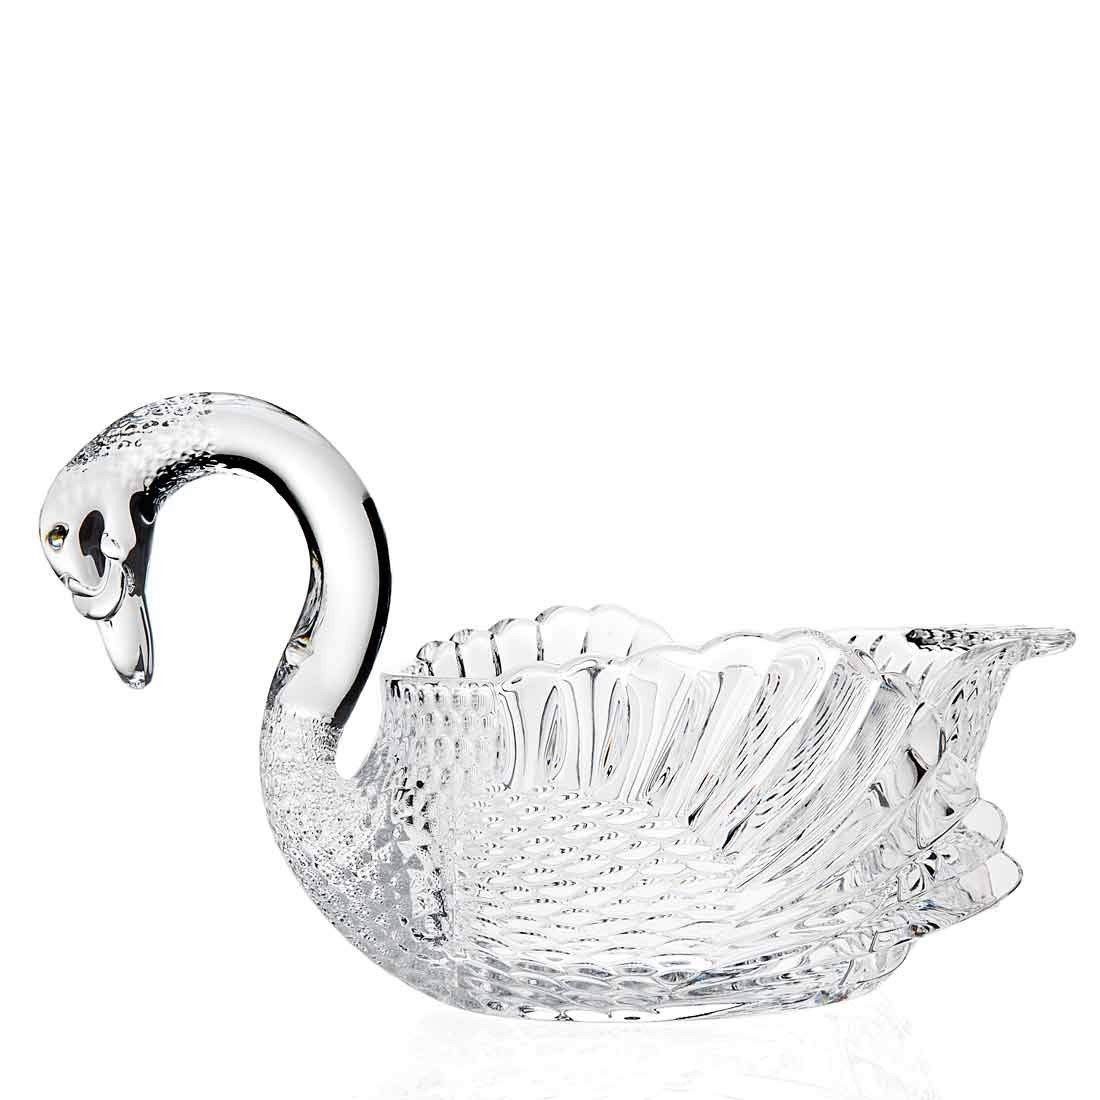 15 Spectacular Shannon Crystal by Godinger Vase 2024 free download shannon crystal by godinger vase of amazon com crystal giftware swan centerpiece bowl home kitchen pertaining to 61s1oir sol sl1100